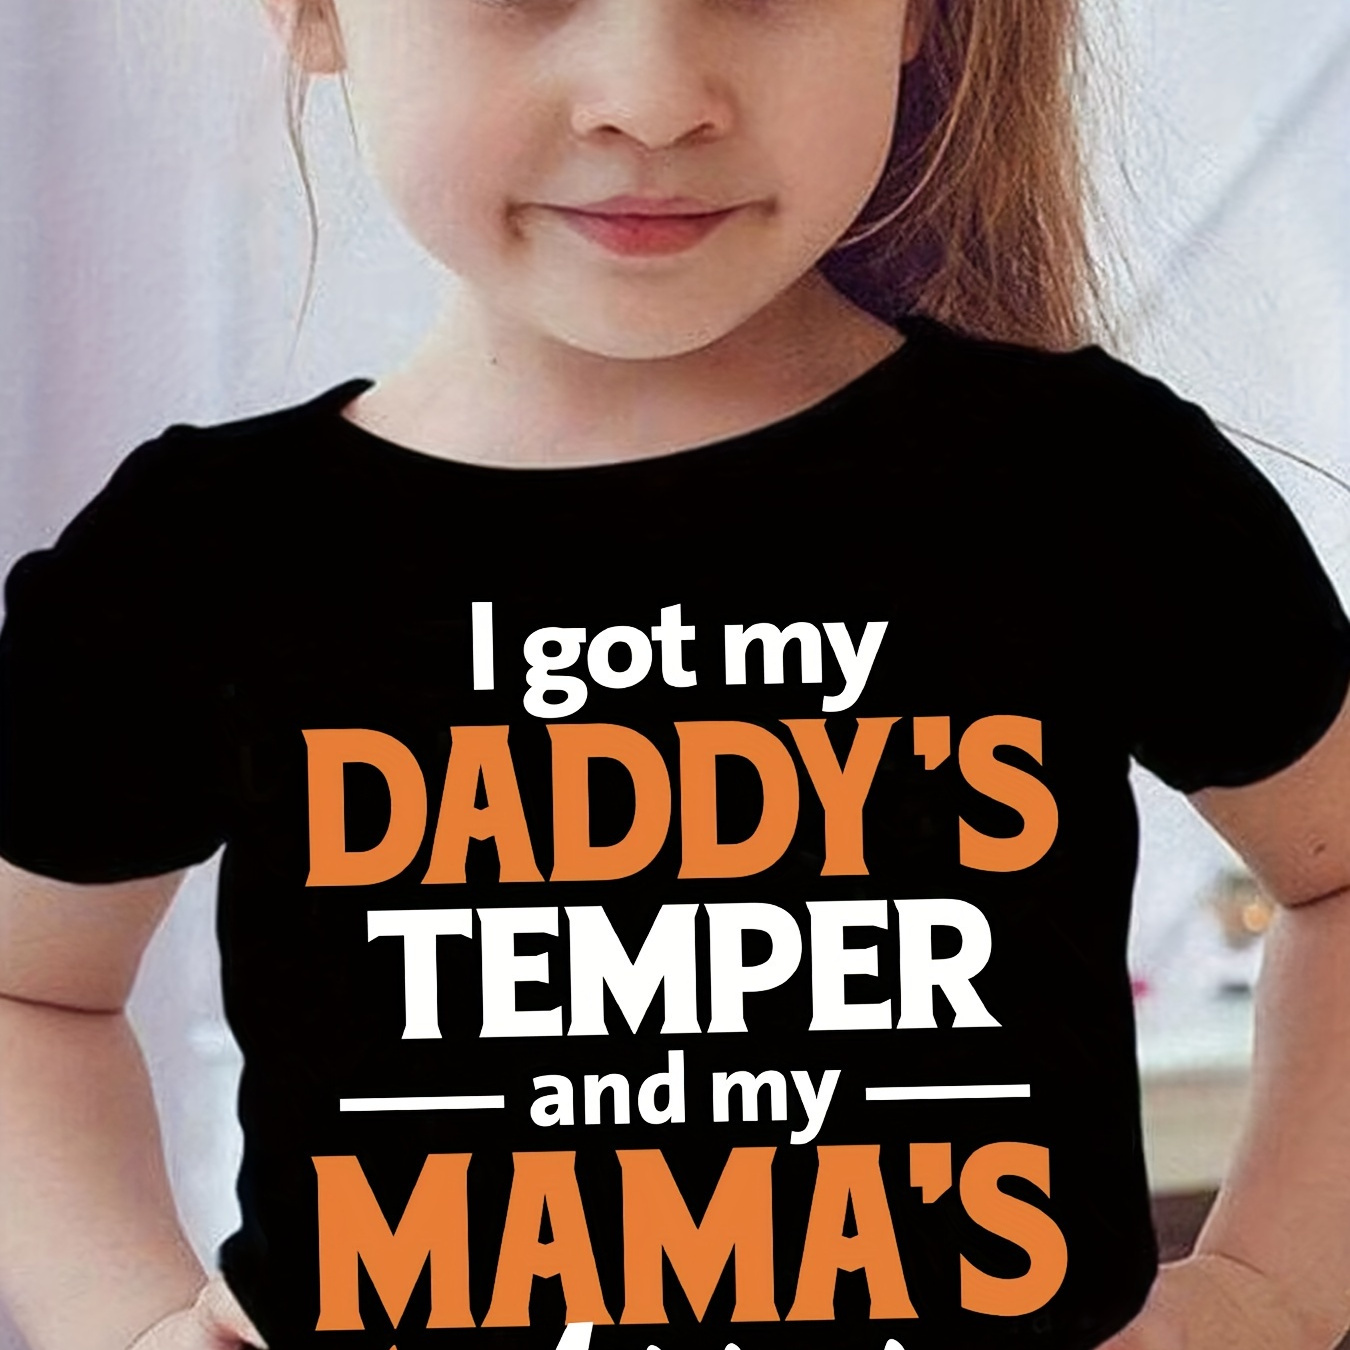 

I Got My Daddy's Temper Print, Girls' Crew Neck Tees, Short Sleeve T-shirts For Spring And Summer, As Gifts For Girls